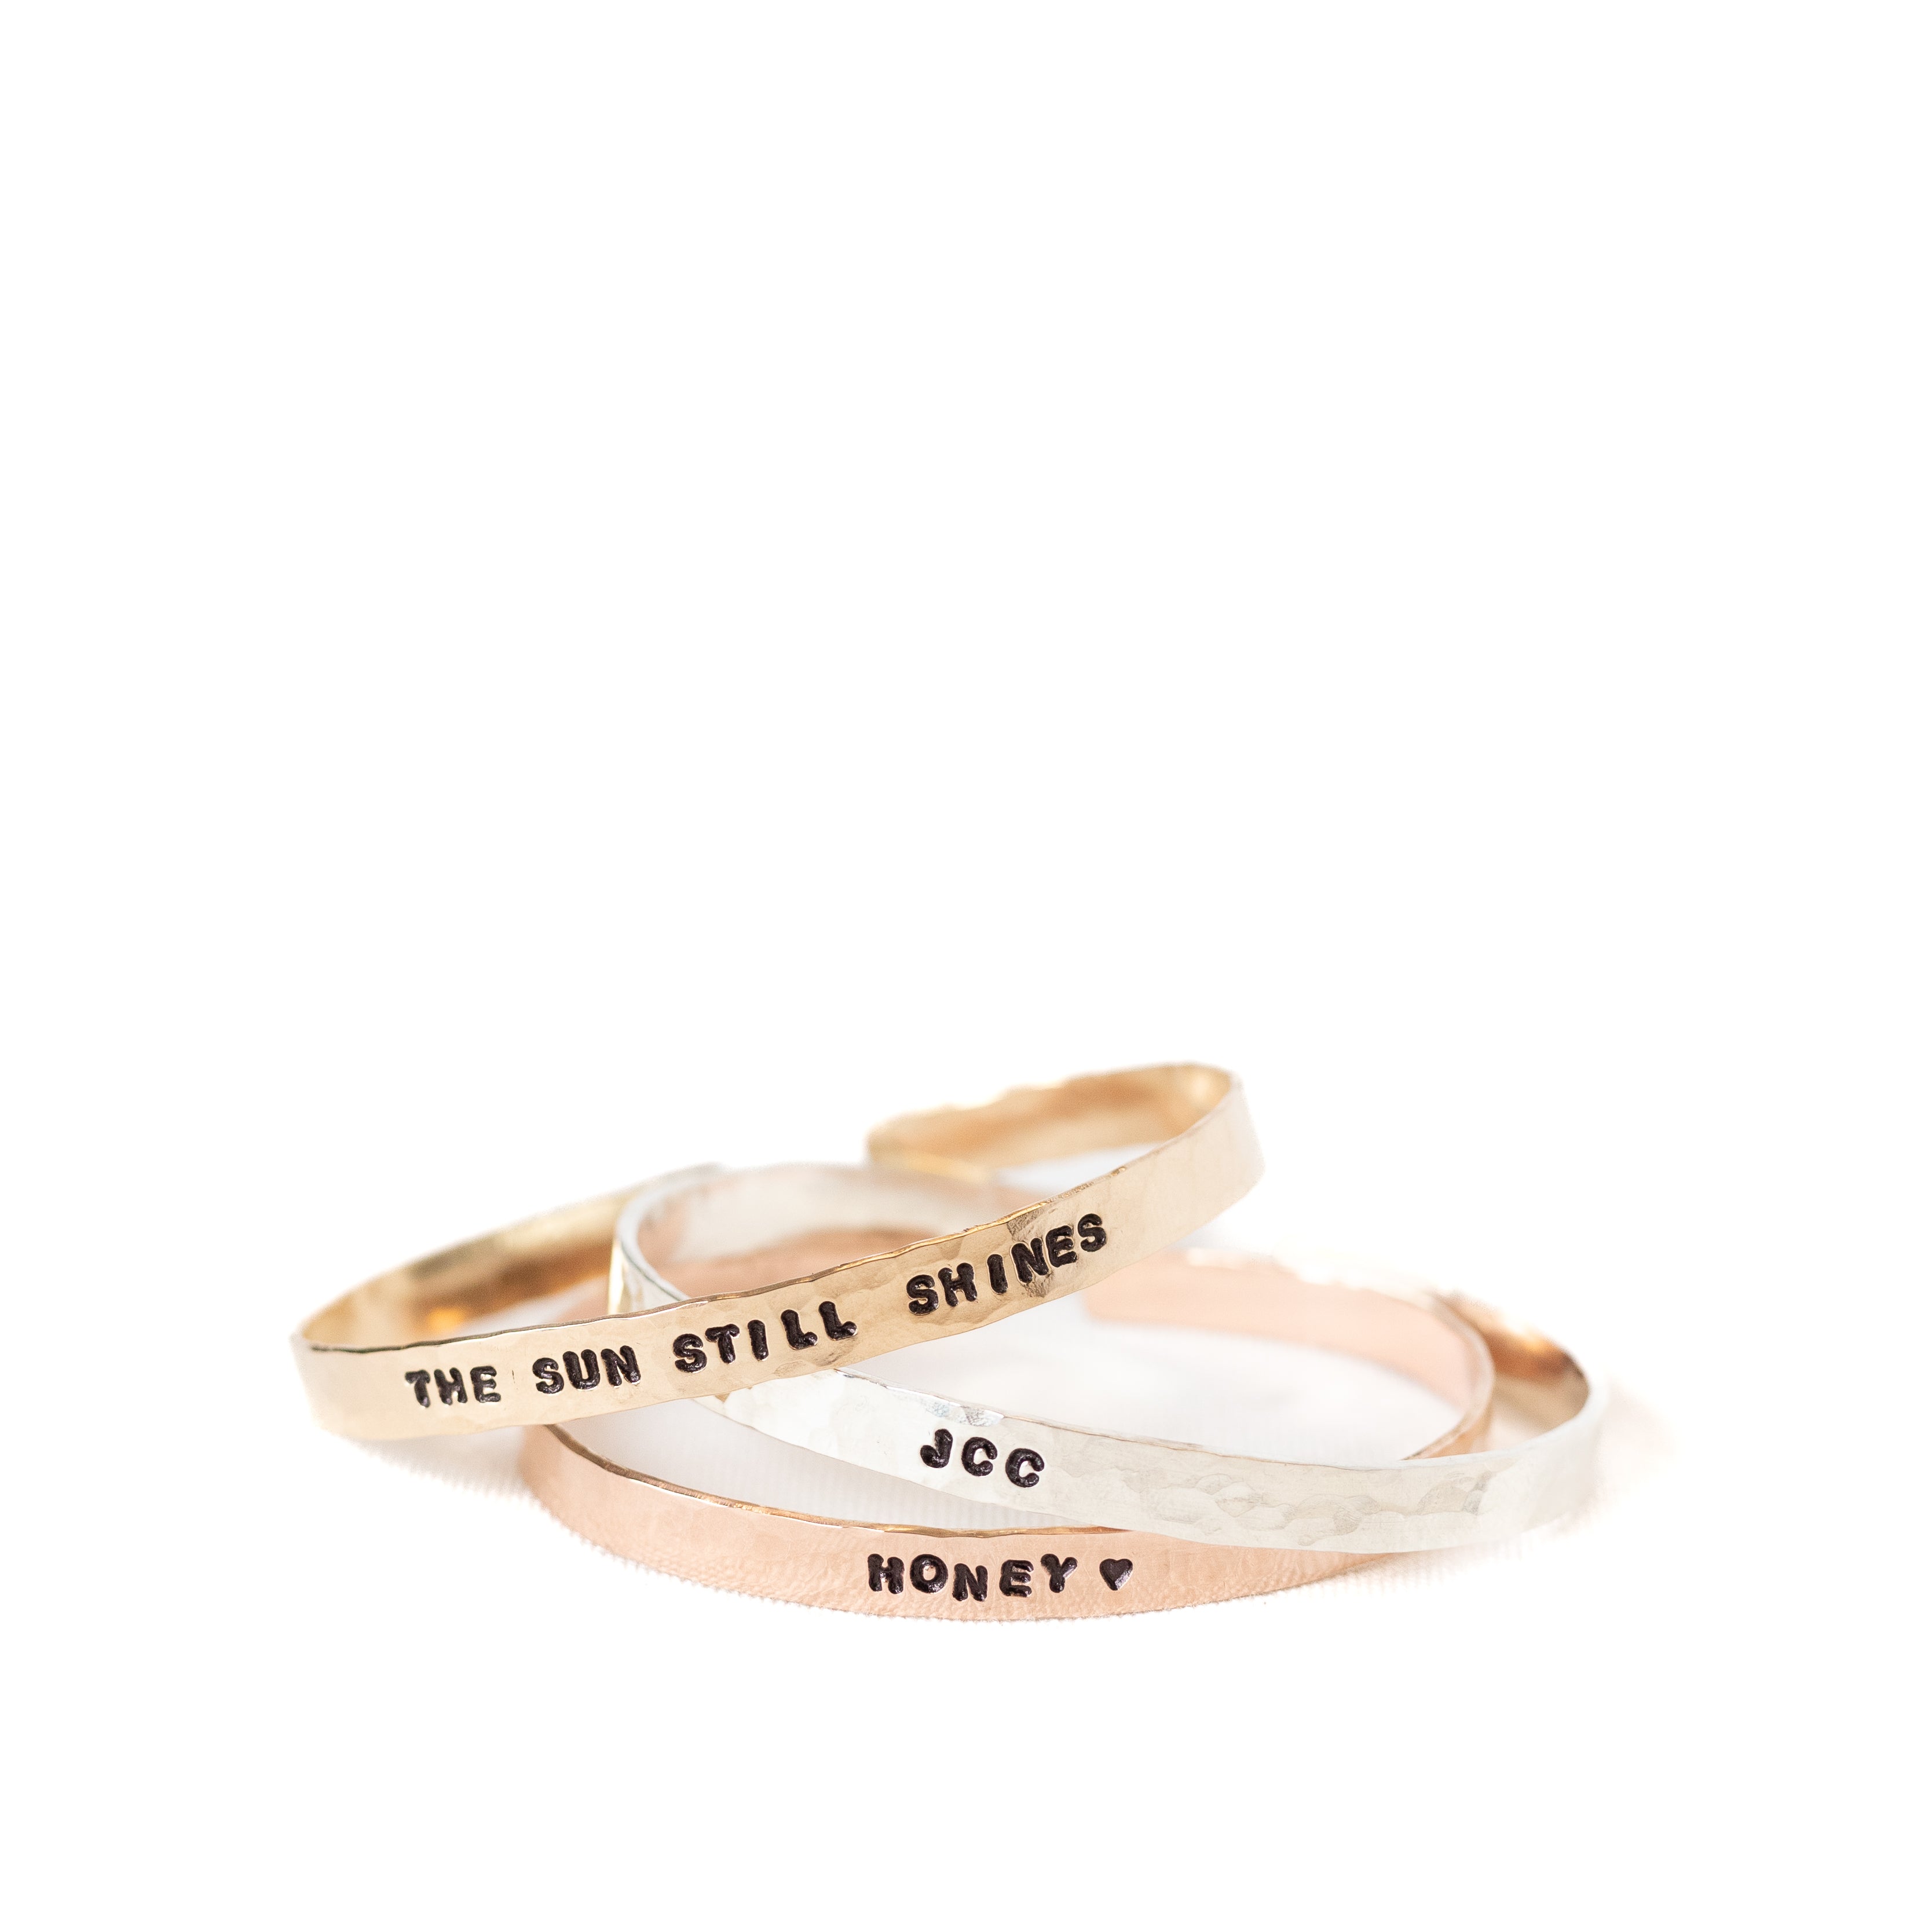 Three different cuffs with phrases and initials stamped on the outside of each cuff. There is a gold, sterling silver, and rose gold cuff pictured